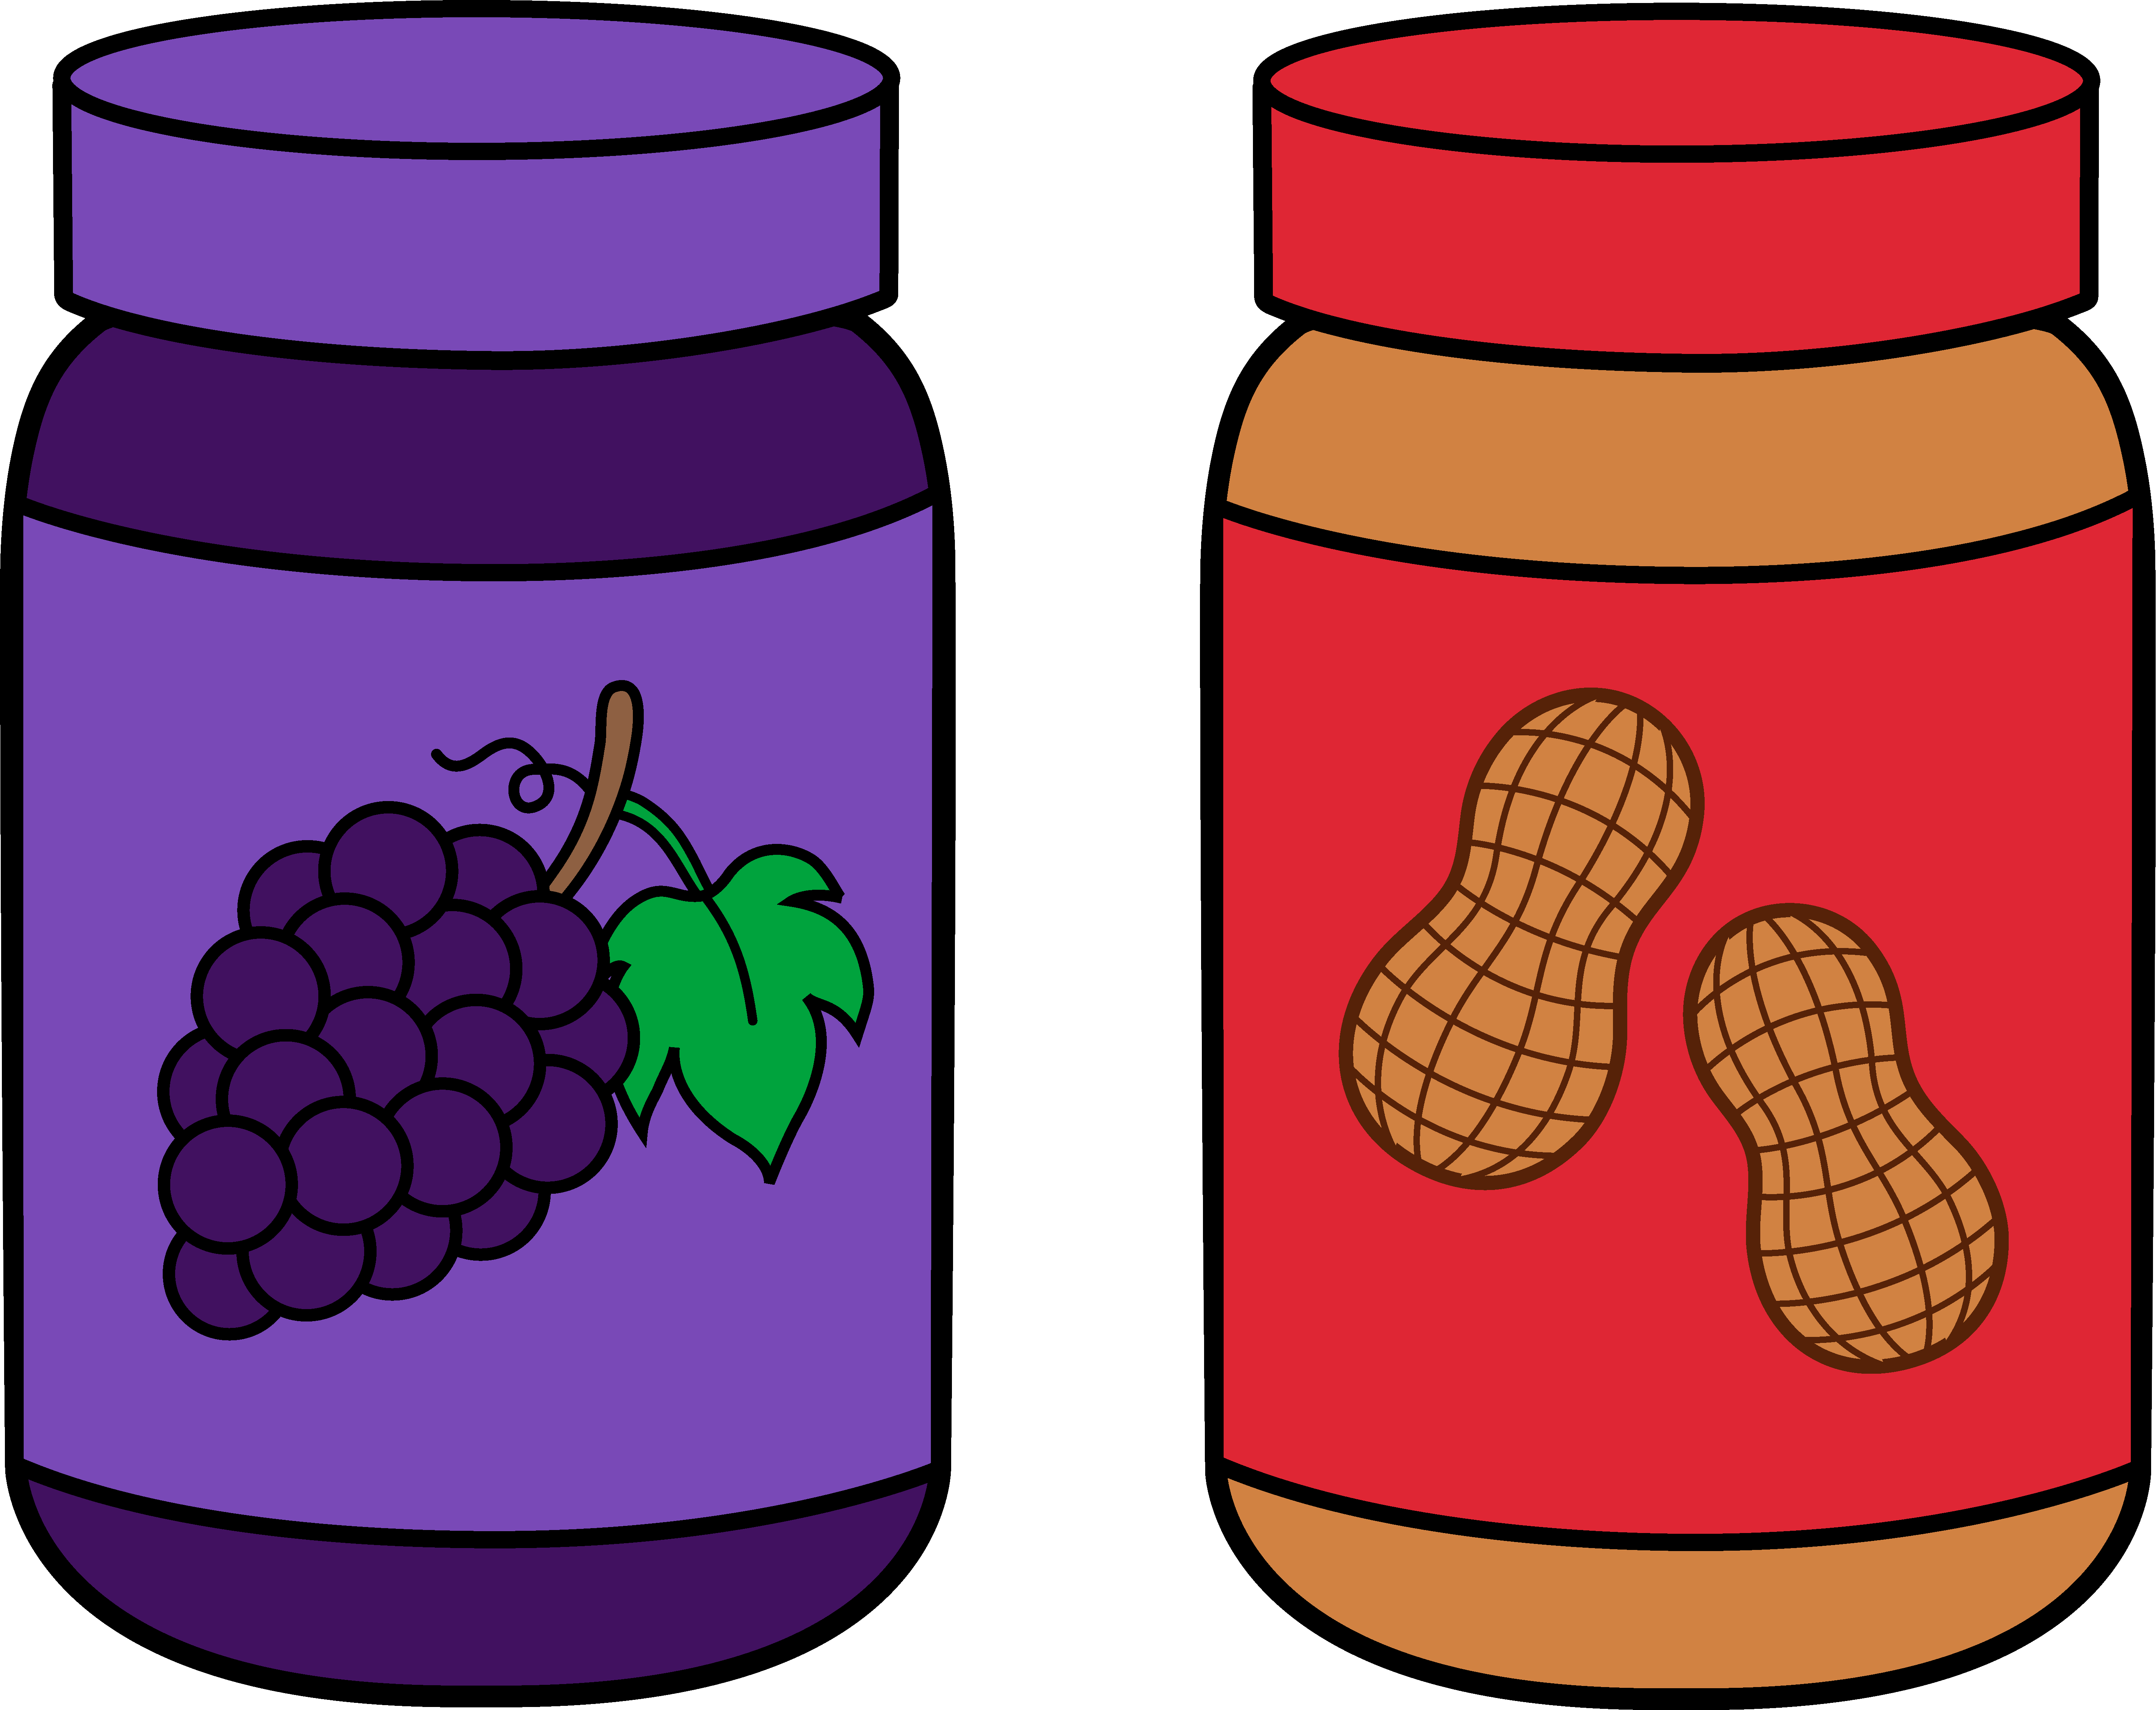 Peanut Butter And Jelly Sandwich Clipart.